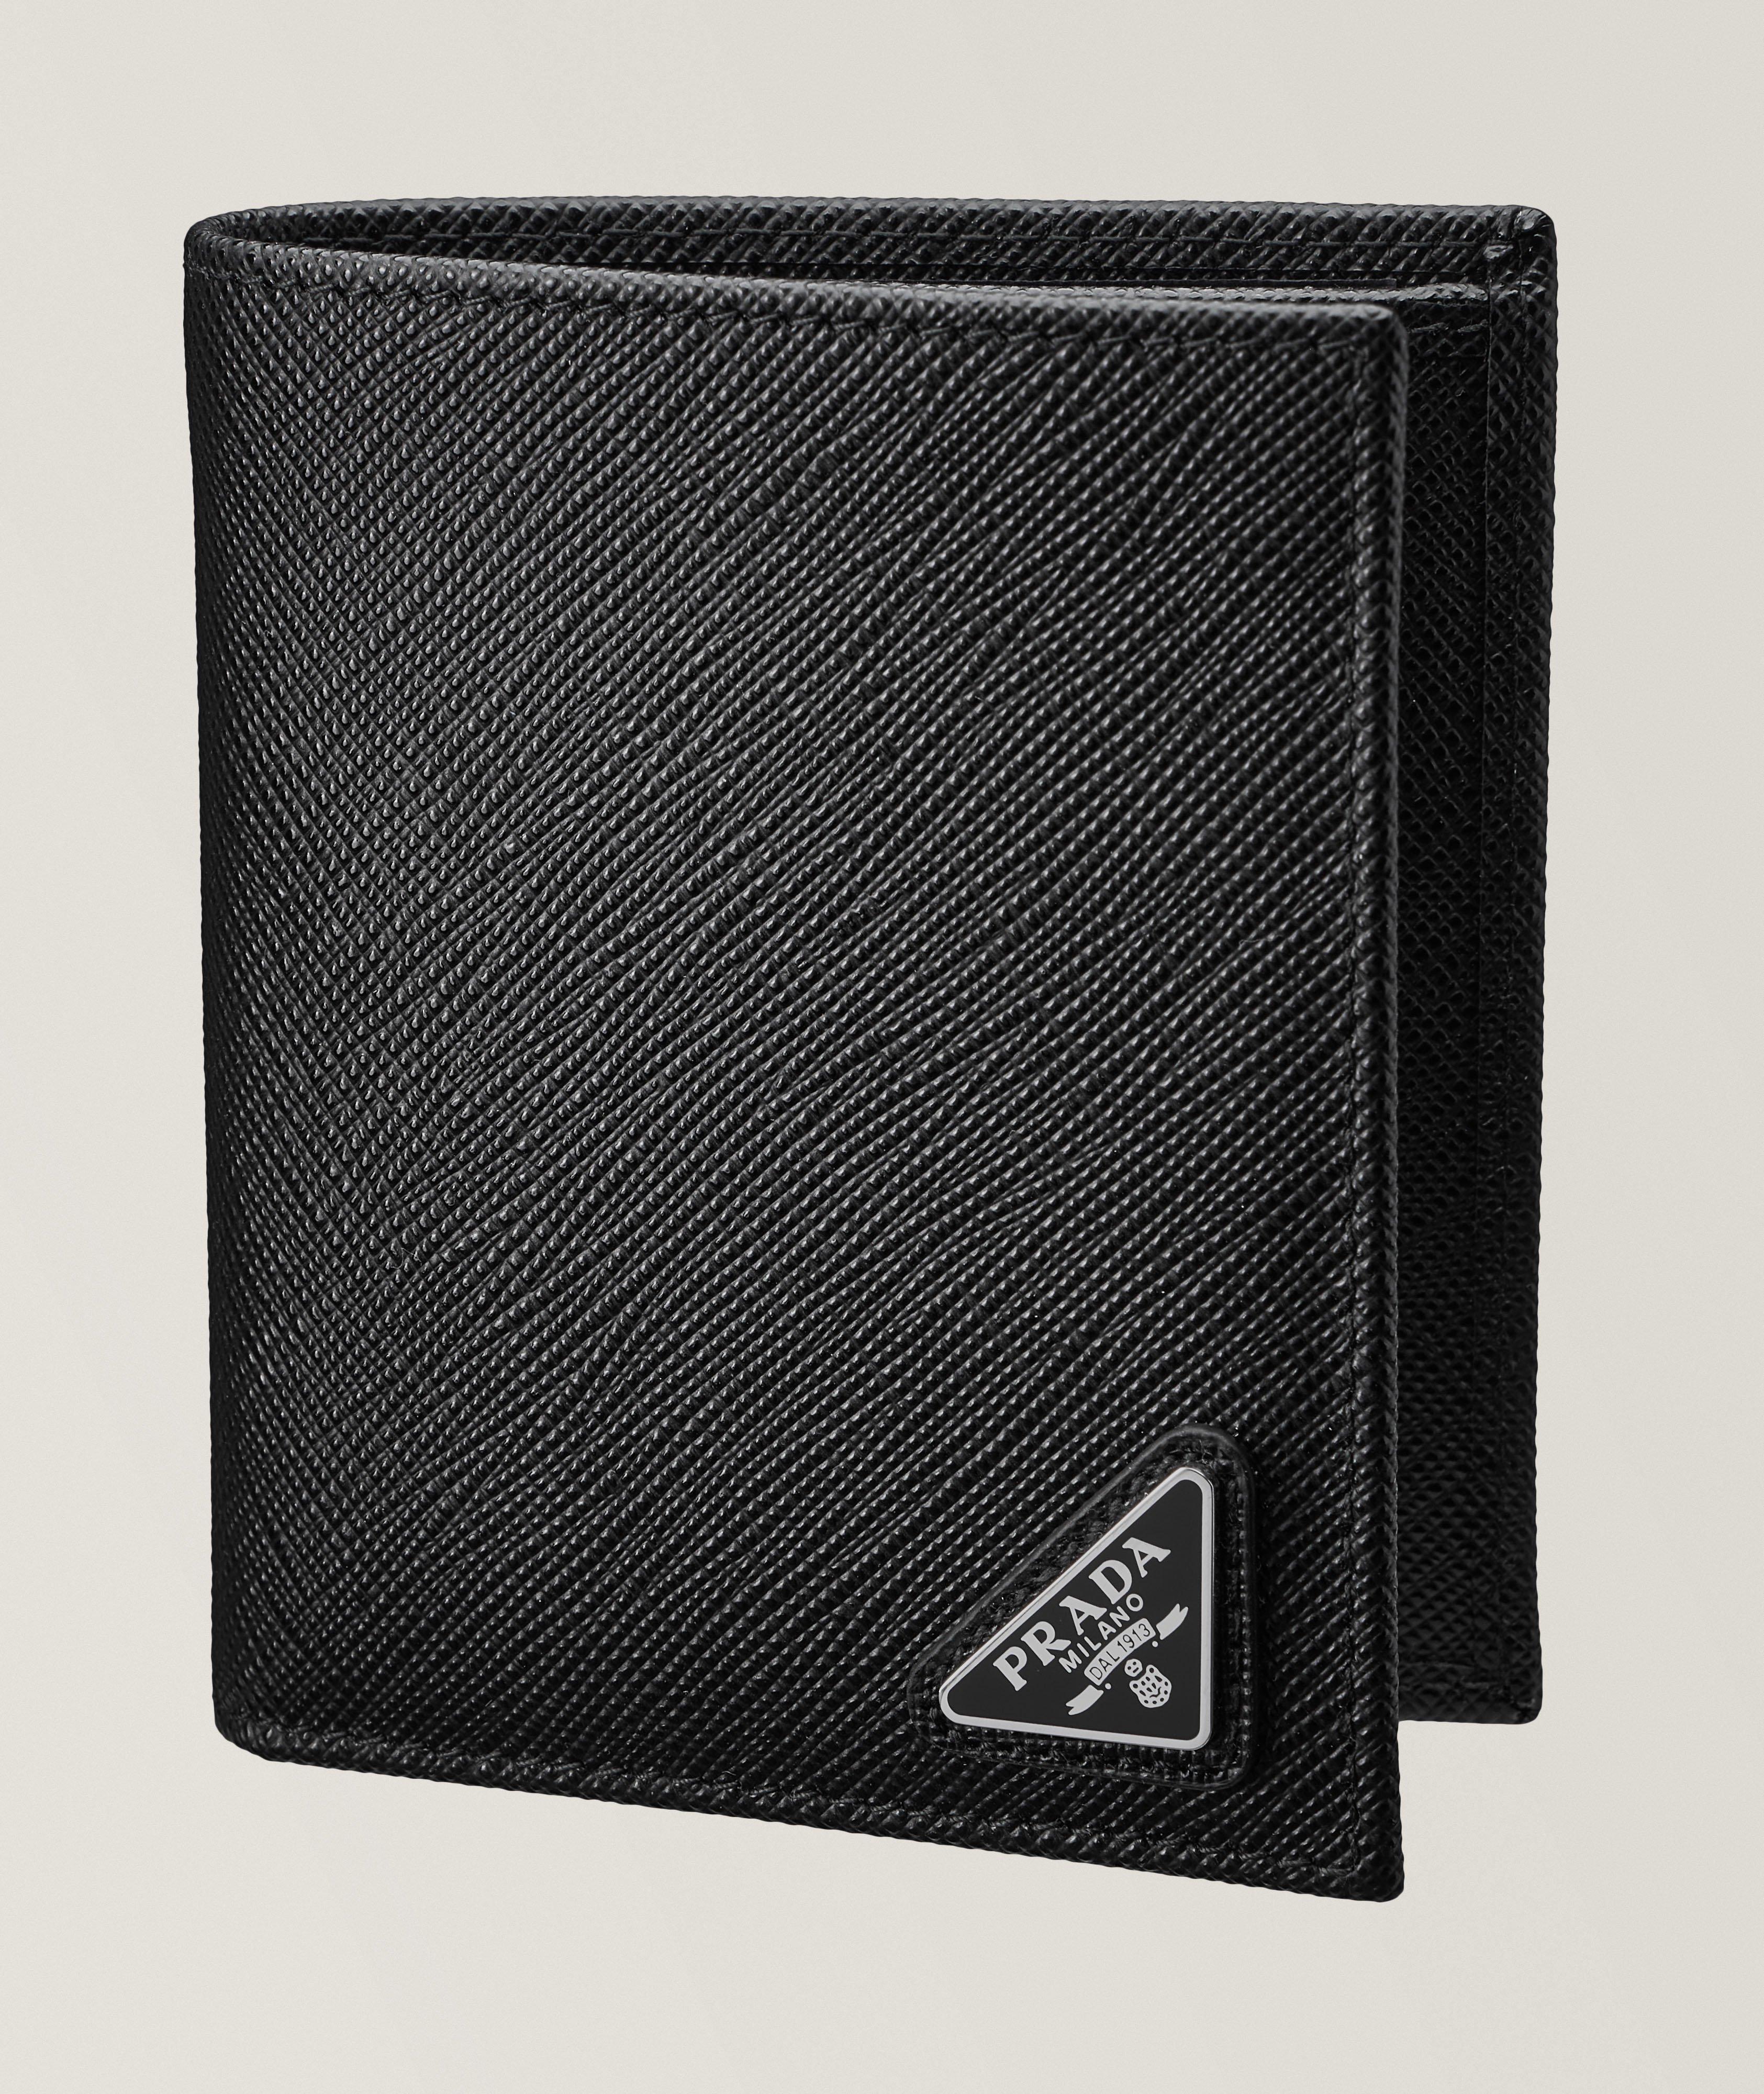 Textured Saffiano Leather Bifold Wallet